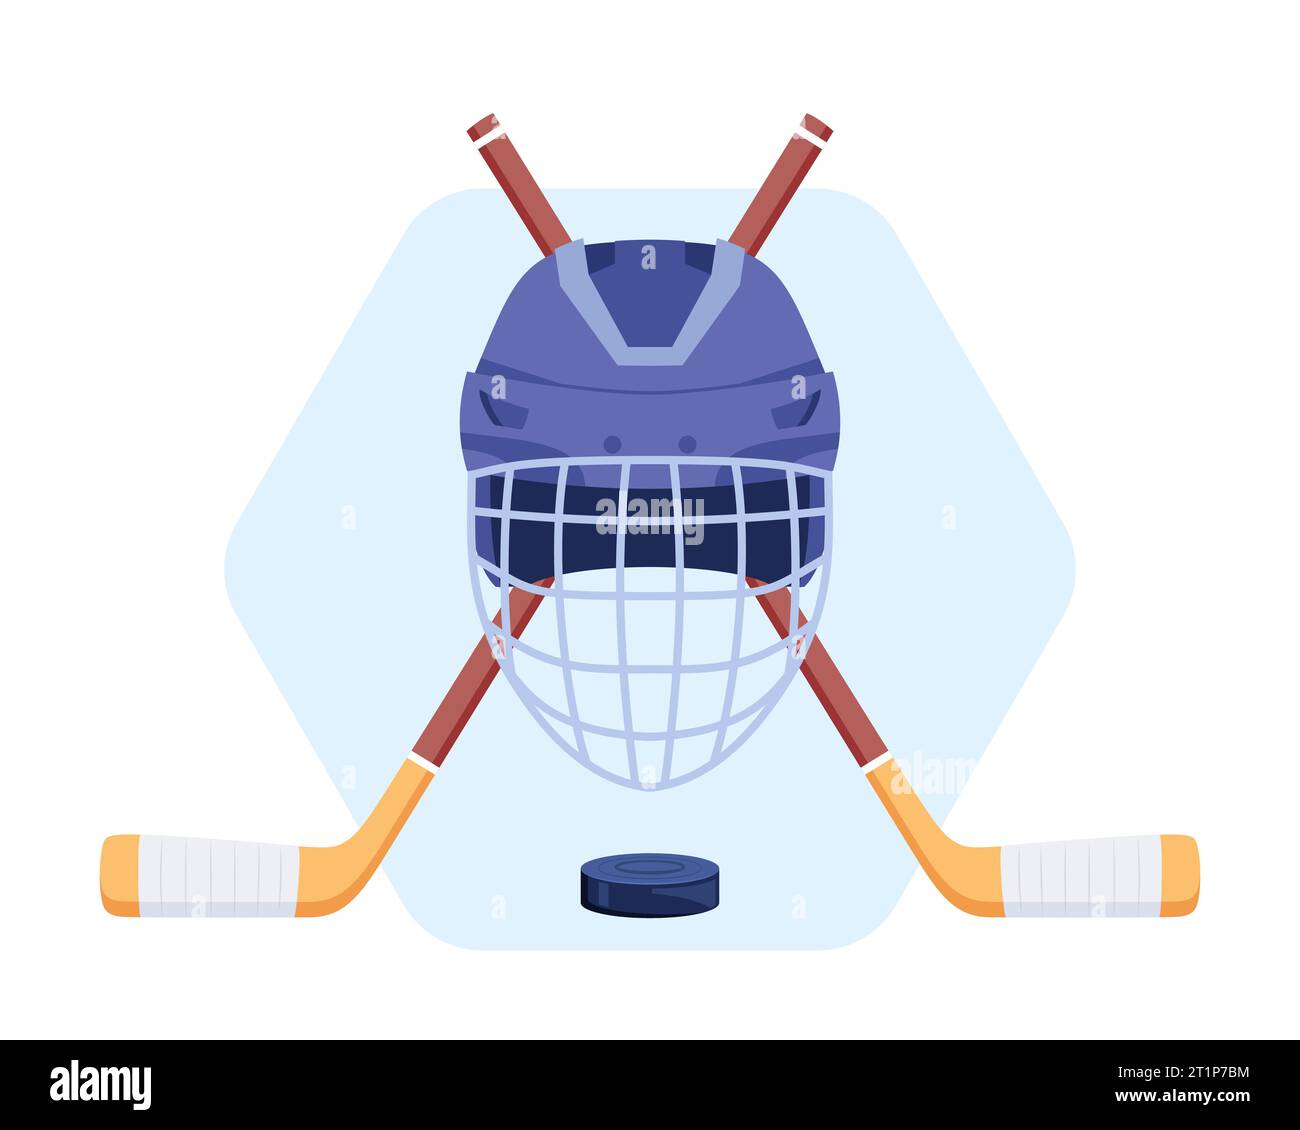 Ice hockey emblem template, badge, logo. Hockey helmet with crossed cues and puck. Vector illustration Stock Vector